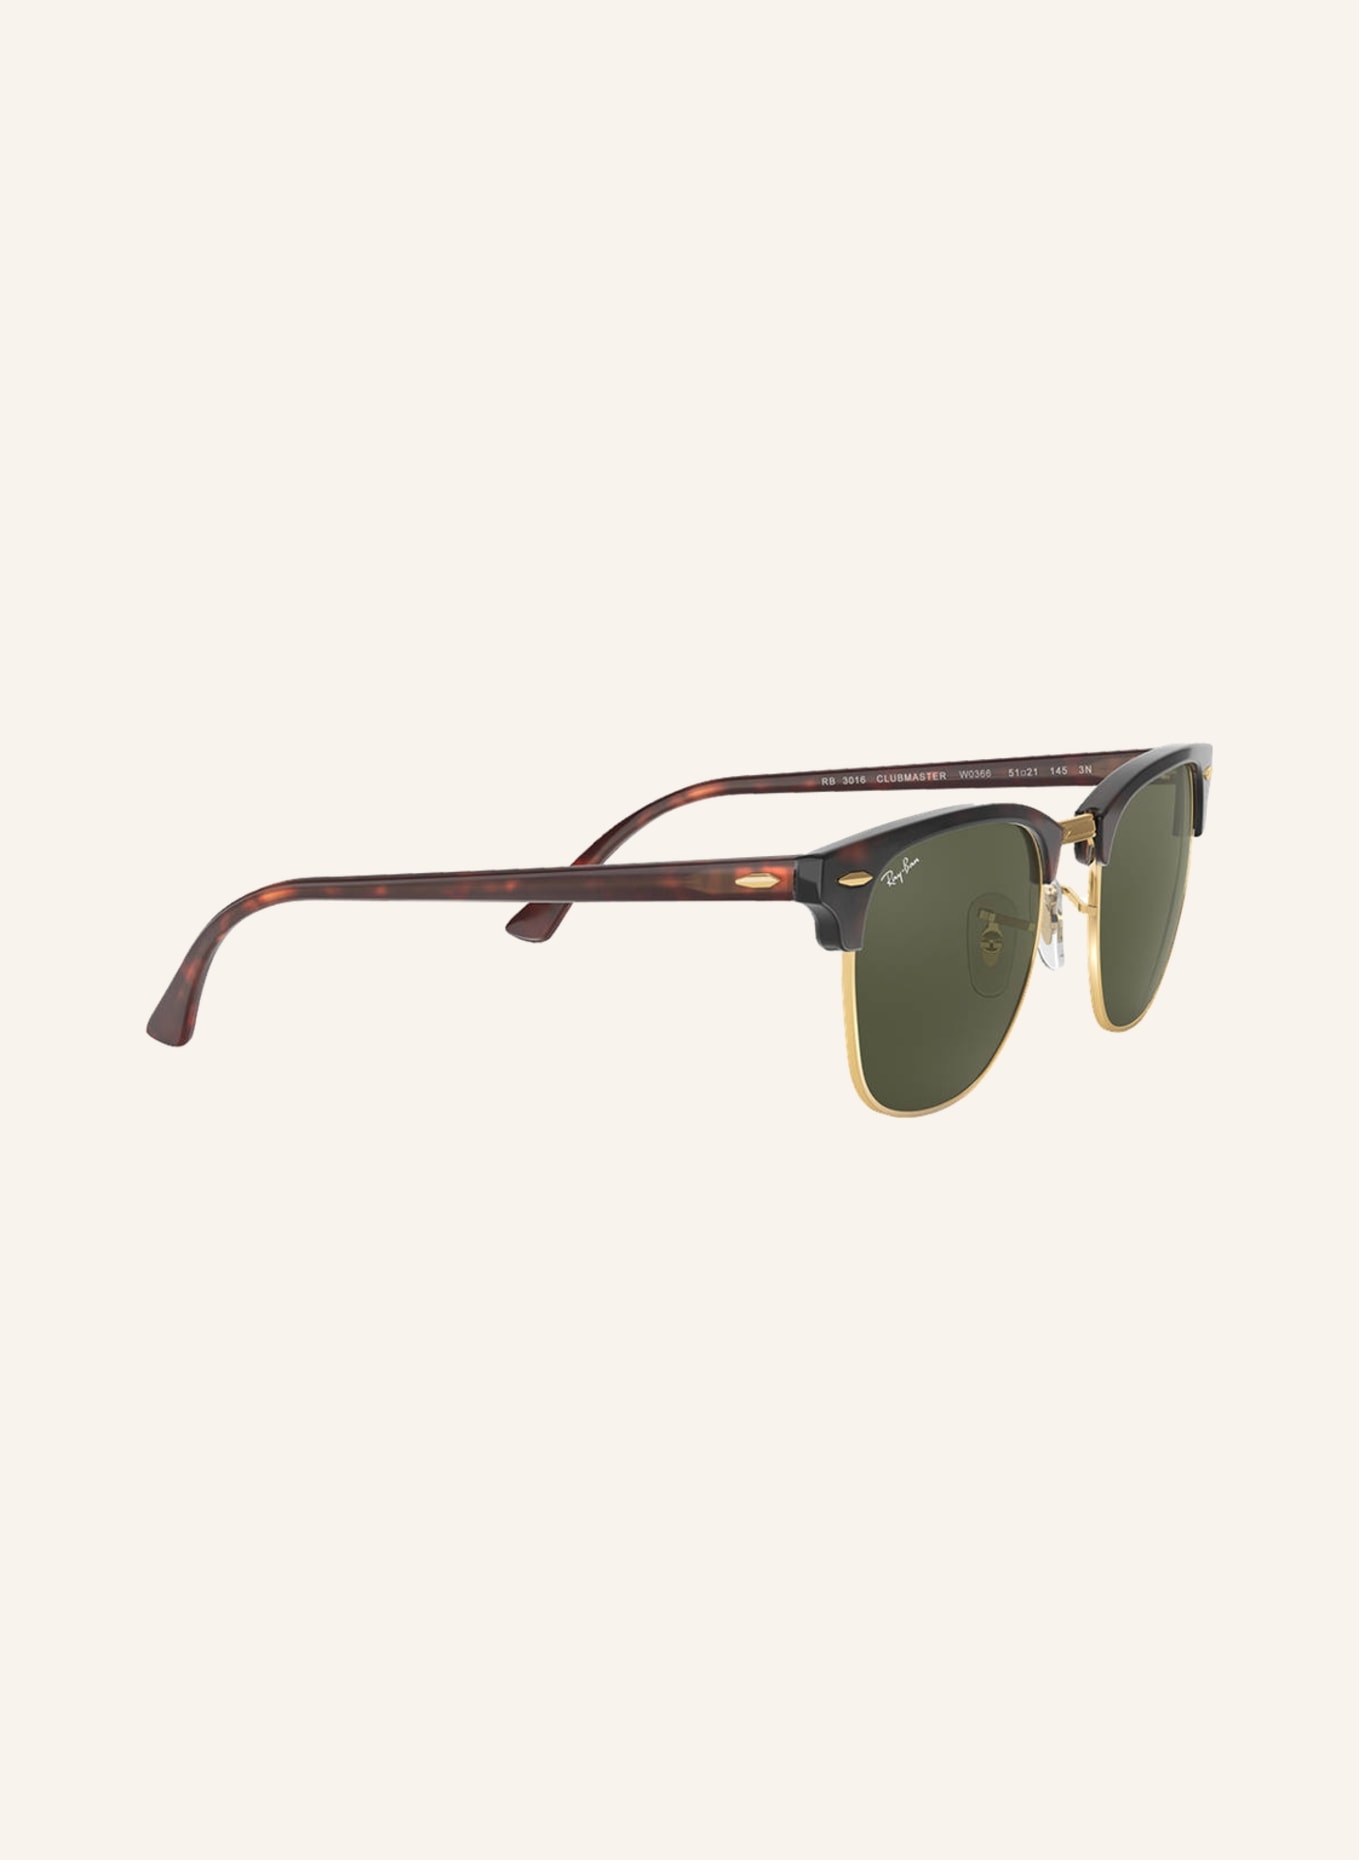 Ray-Ban Sunglasses RB3016 CLUBMASTER, Color: W0366 - HAVANA/GOLD/DARK GREEN (Image 3)